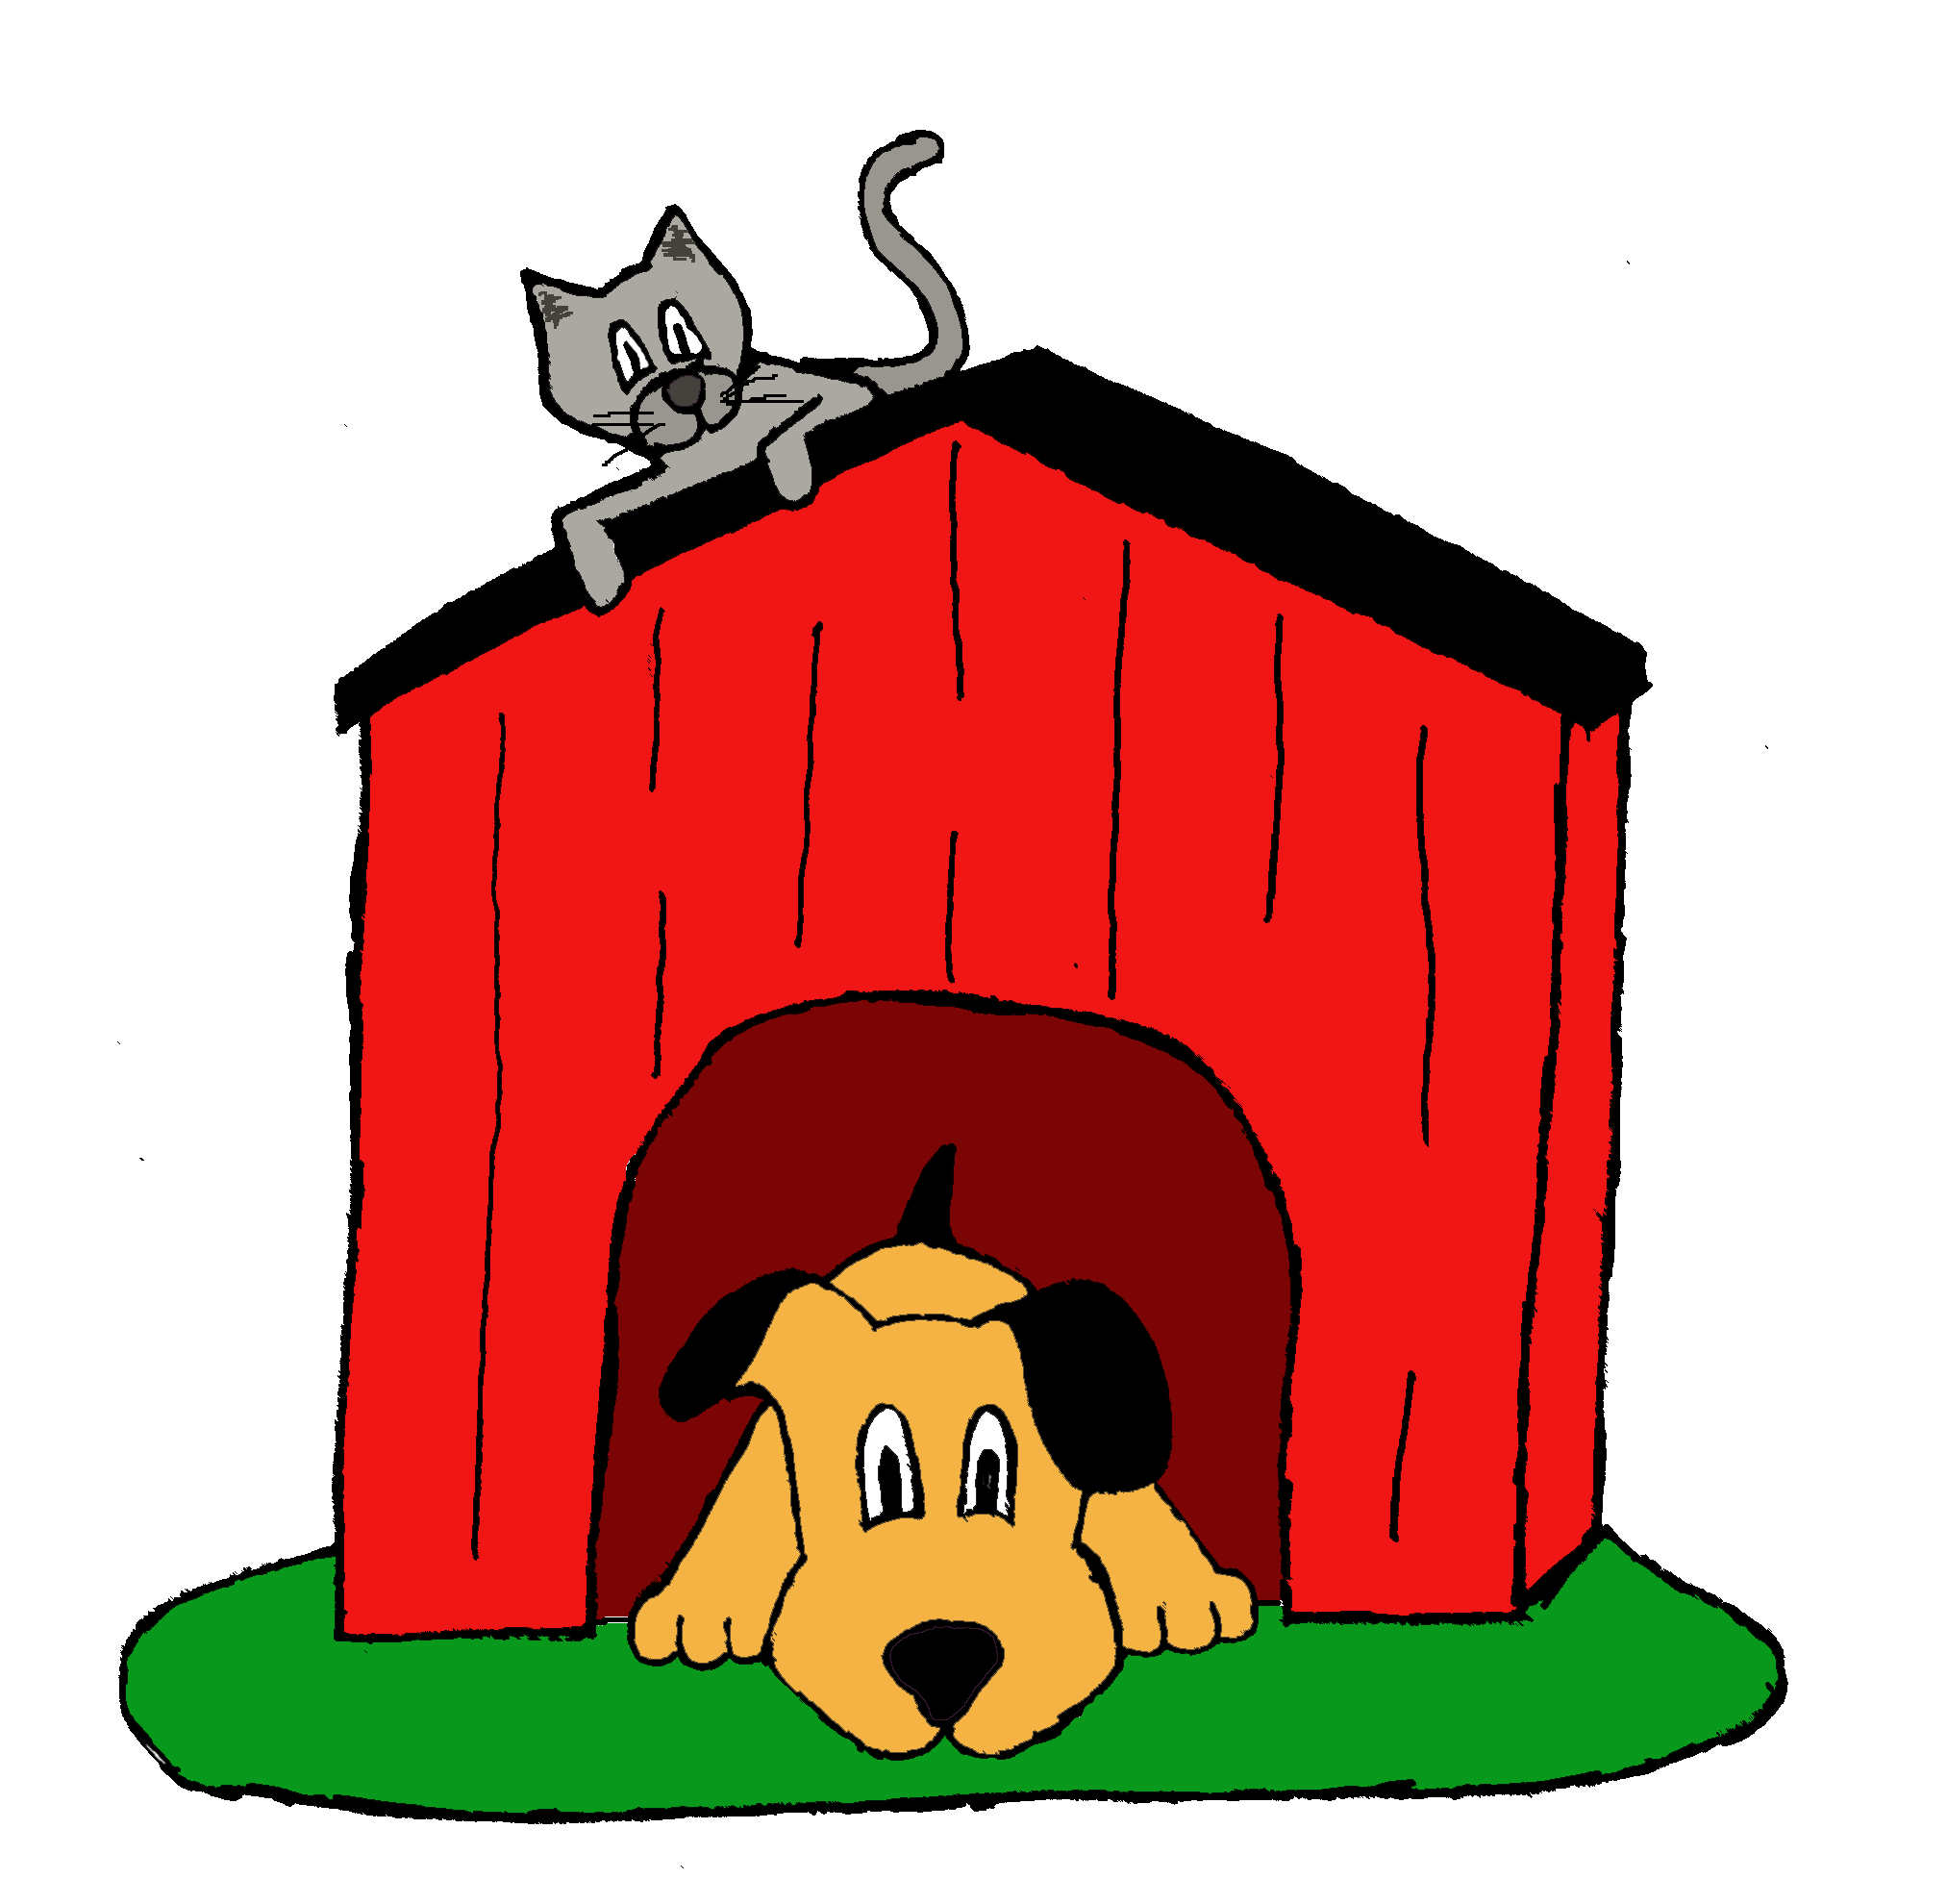 Doghouse clipart. Panda free images dogboneinbowlclipart